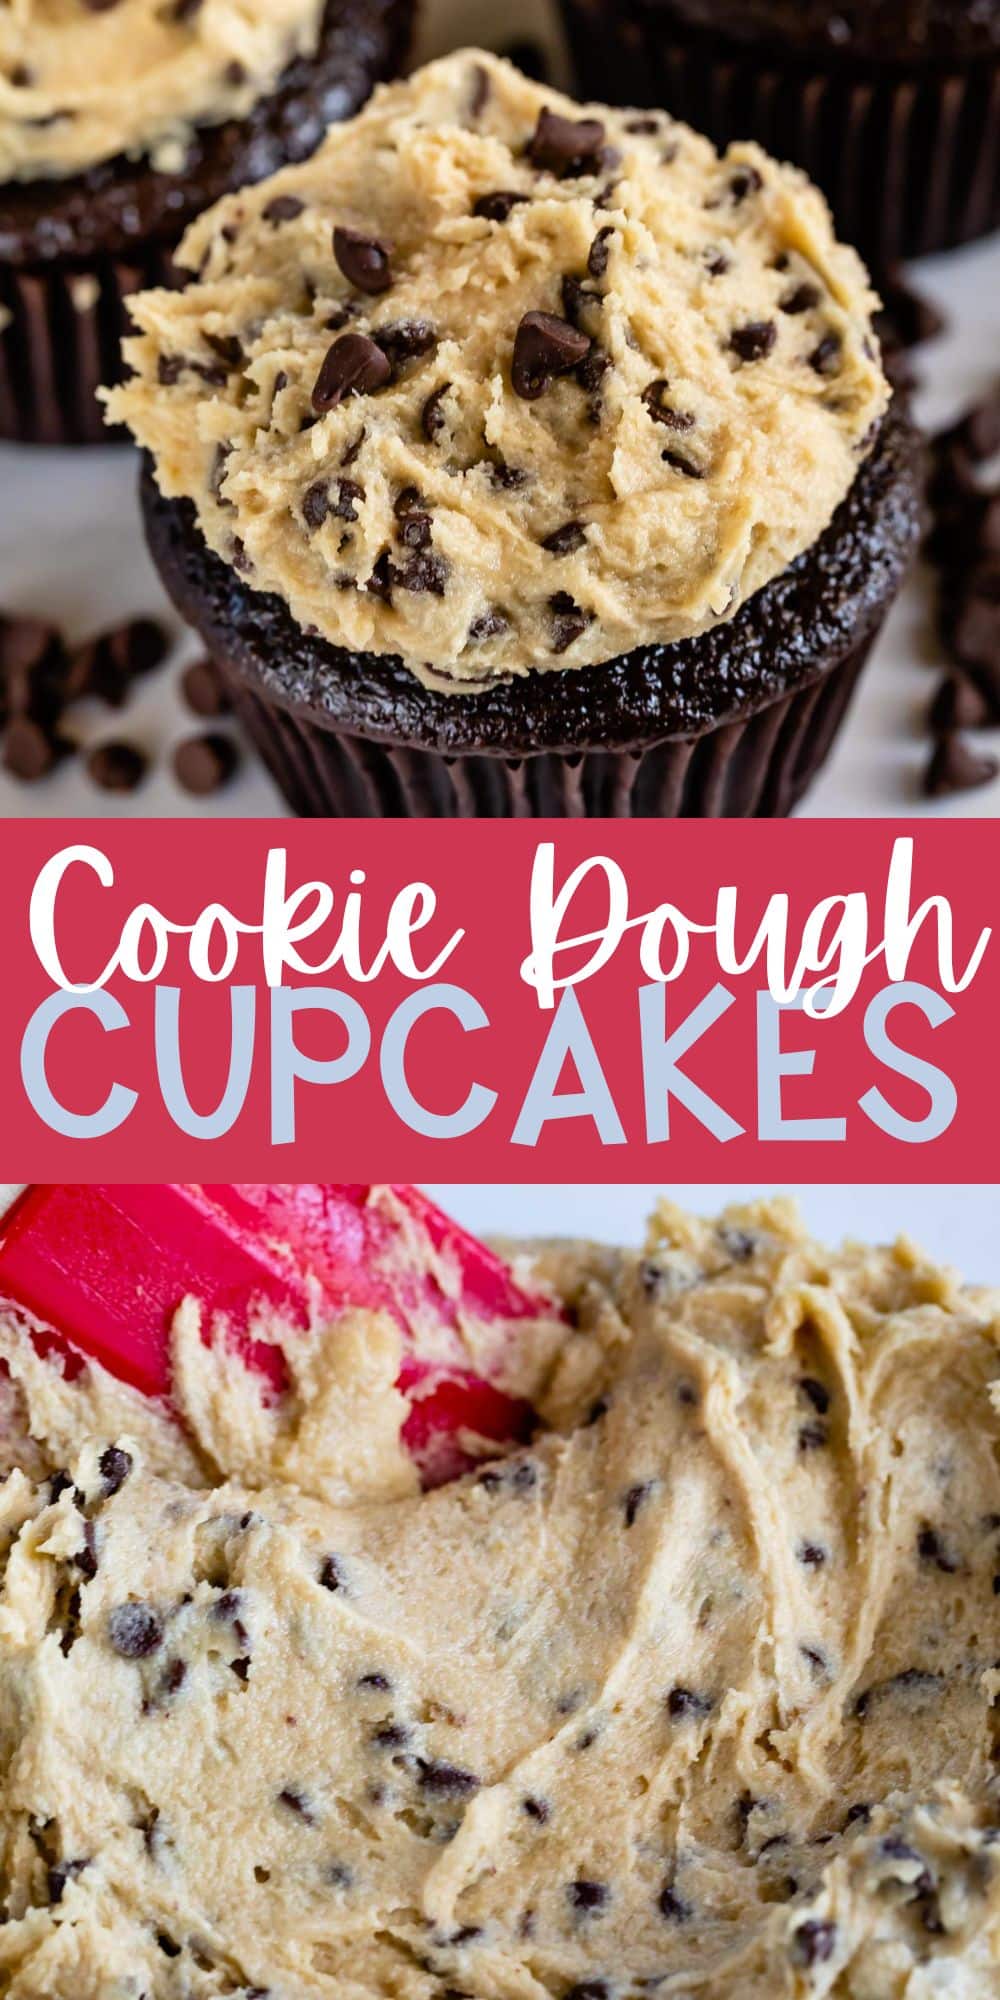 two photos of chocolate cupcake with cookie dough frosting and words on the image.